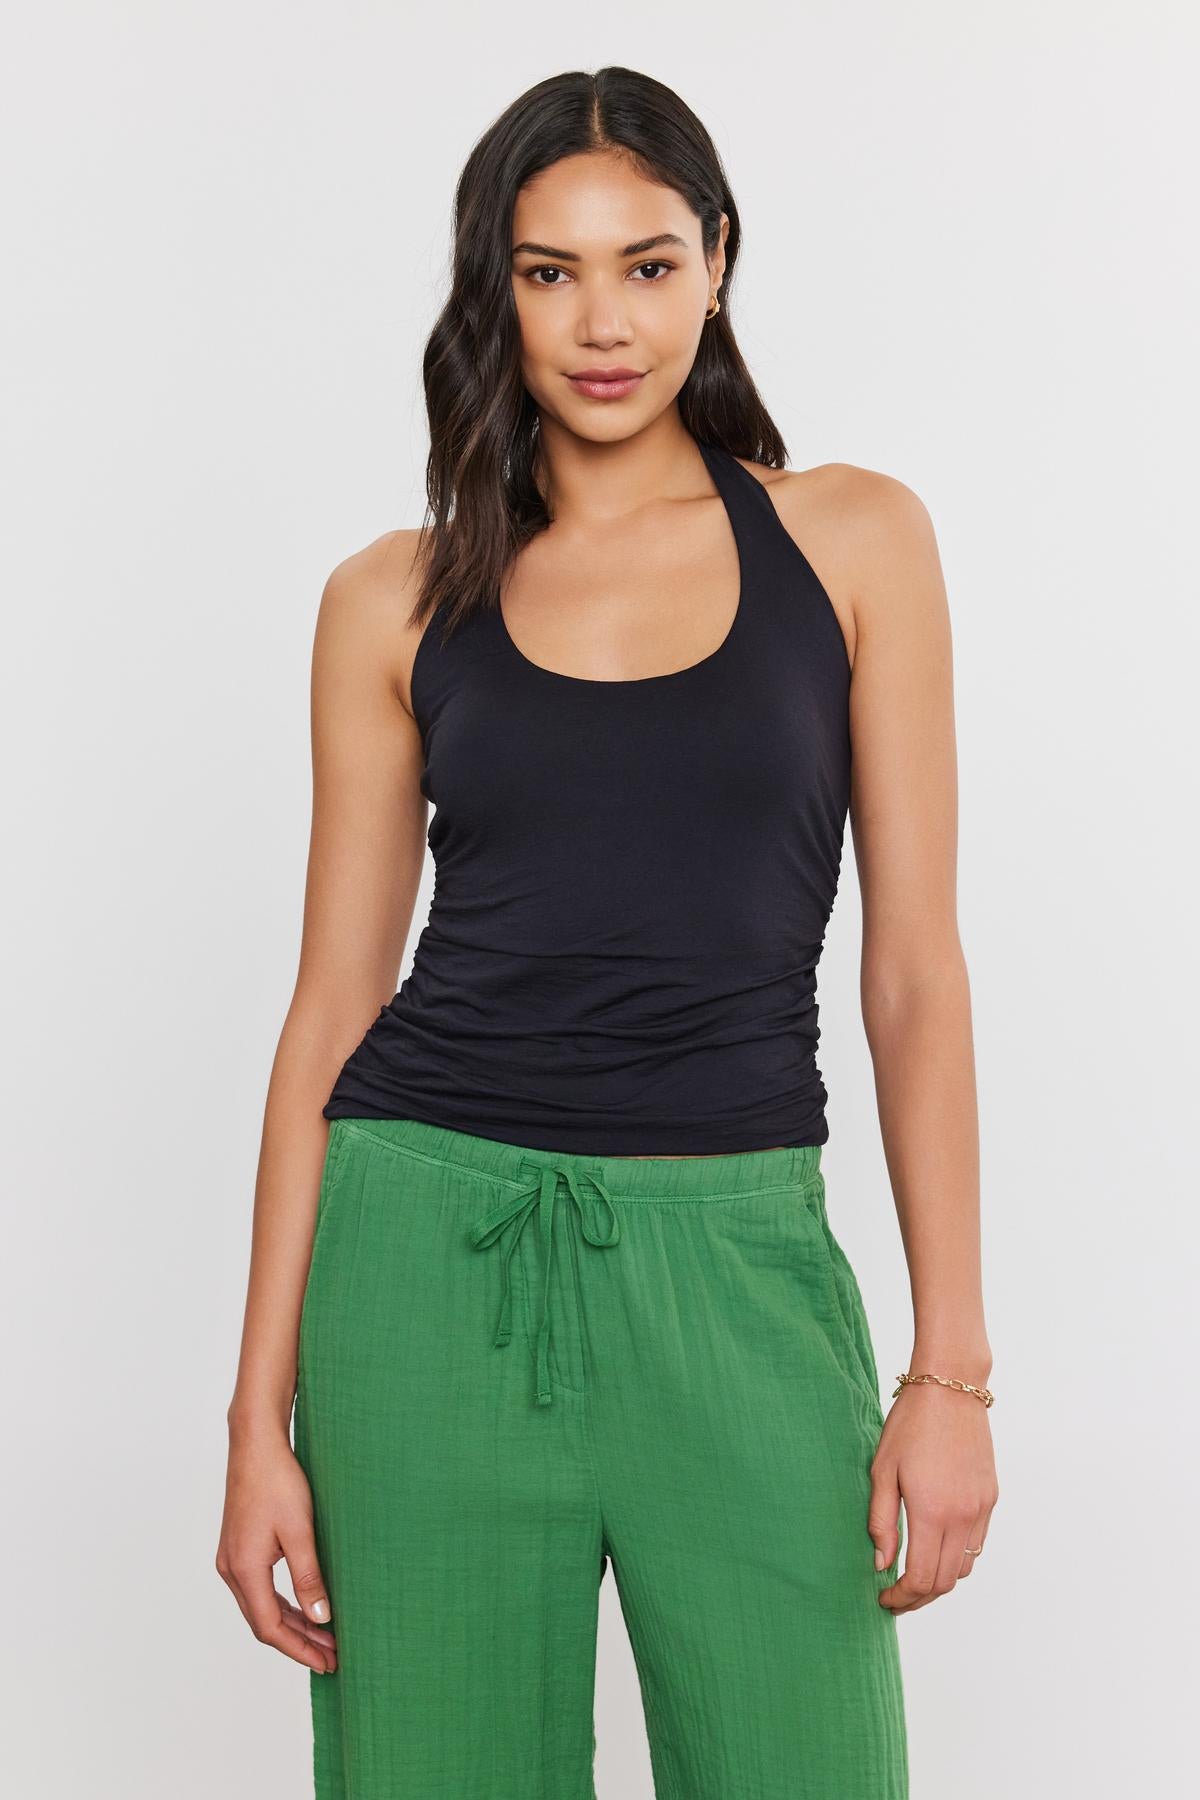   A woman standing against a white background wearing a WHITLEY TANK TOP by Velvet by Graham & Spencer and green pants. 